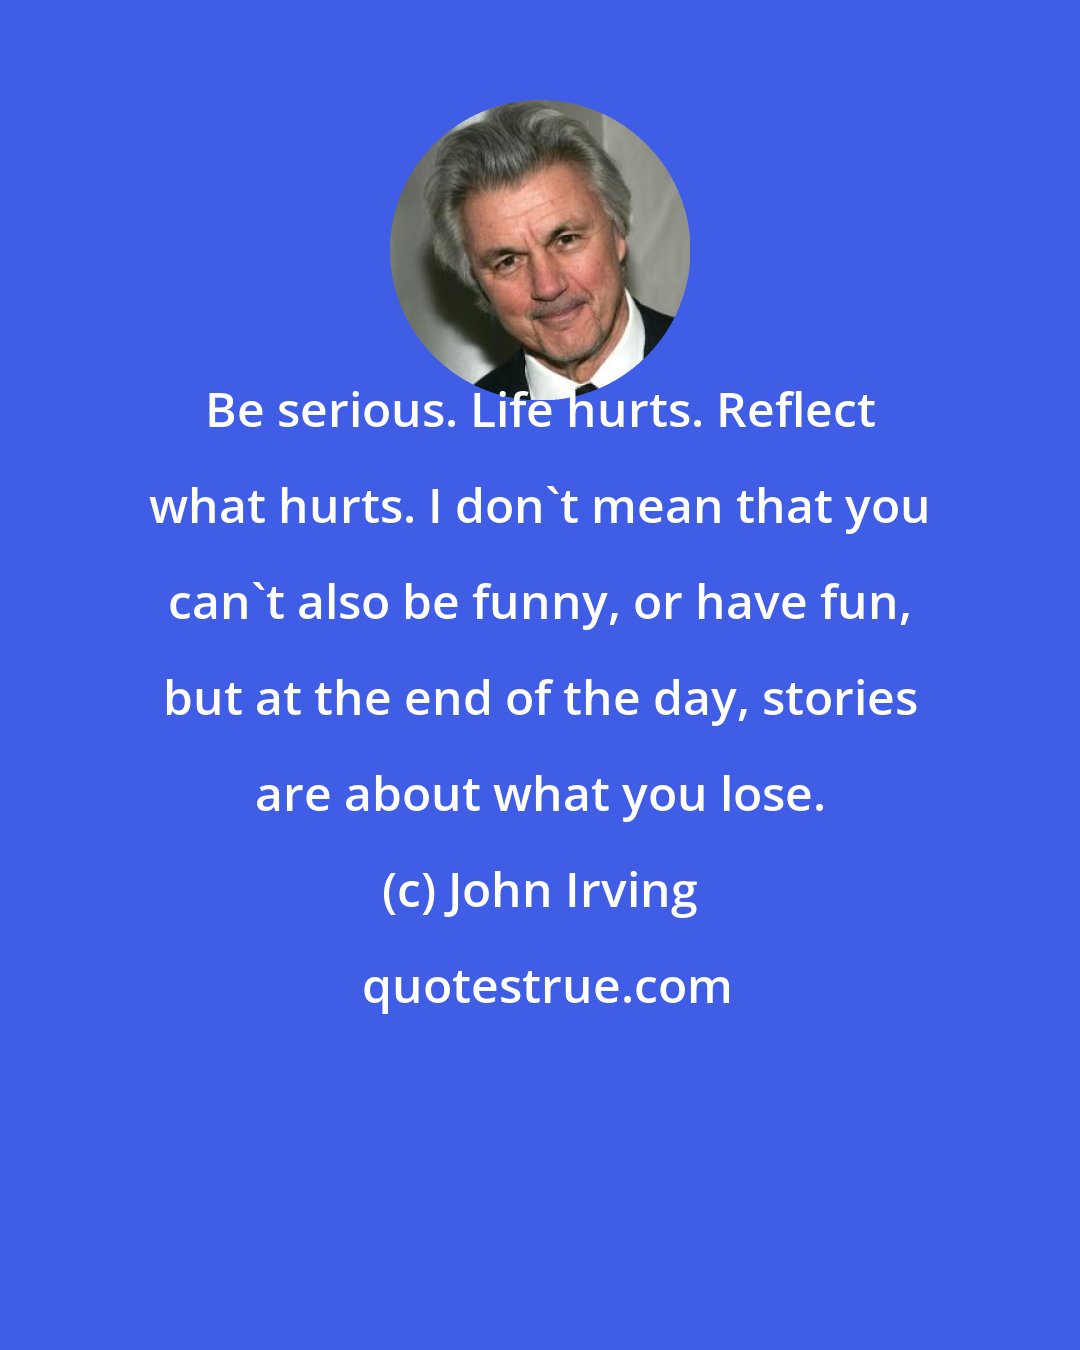 John Irving: Be serious. Life hurts. Reflect what hurts. I don't mean that you can't also be funny, or have fun, but at the end of the day, stories are about what you lose.